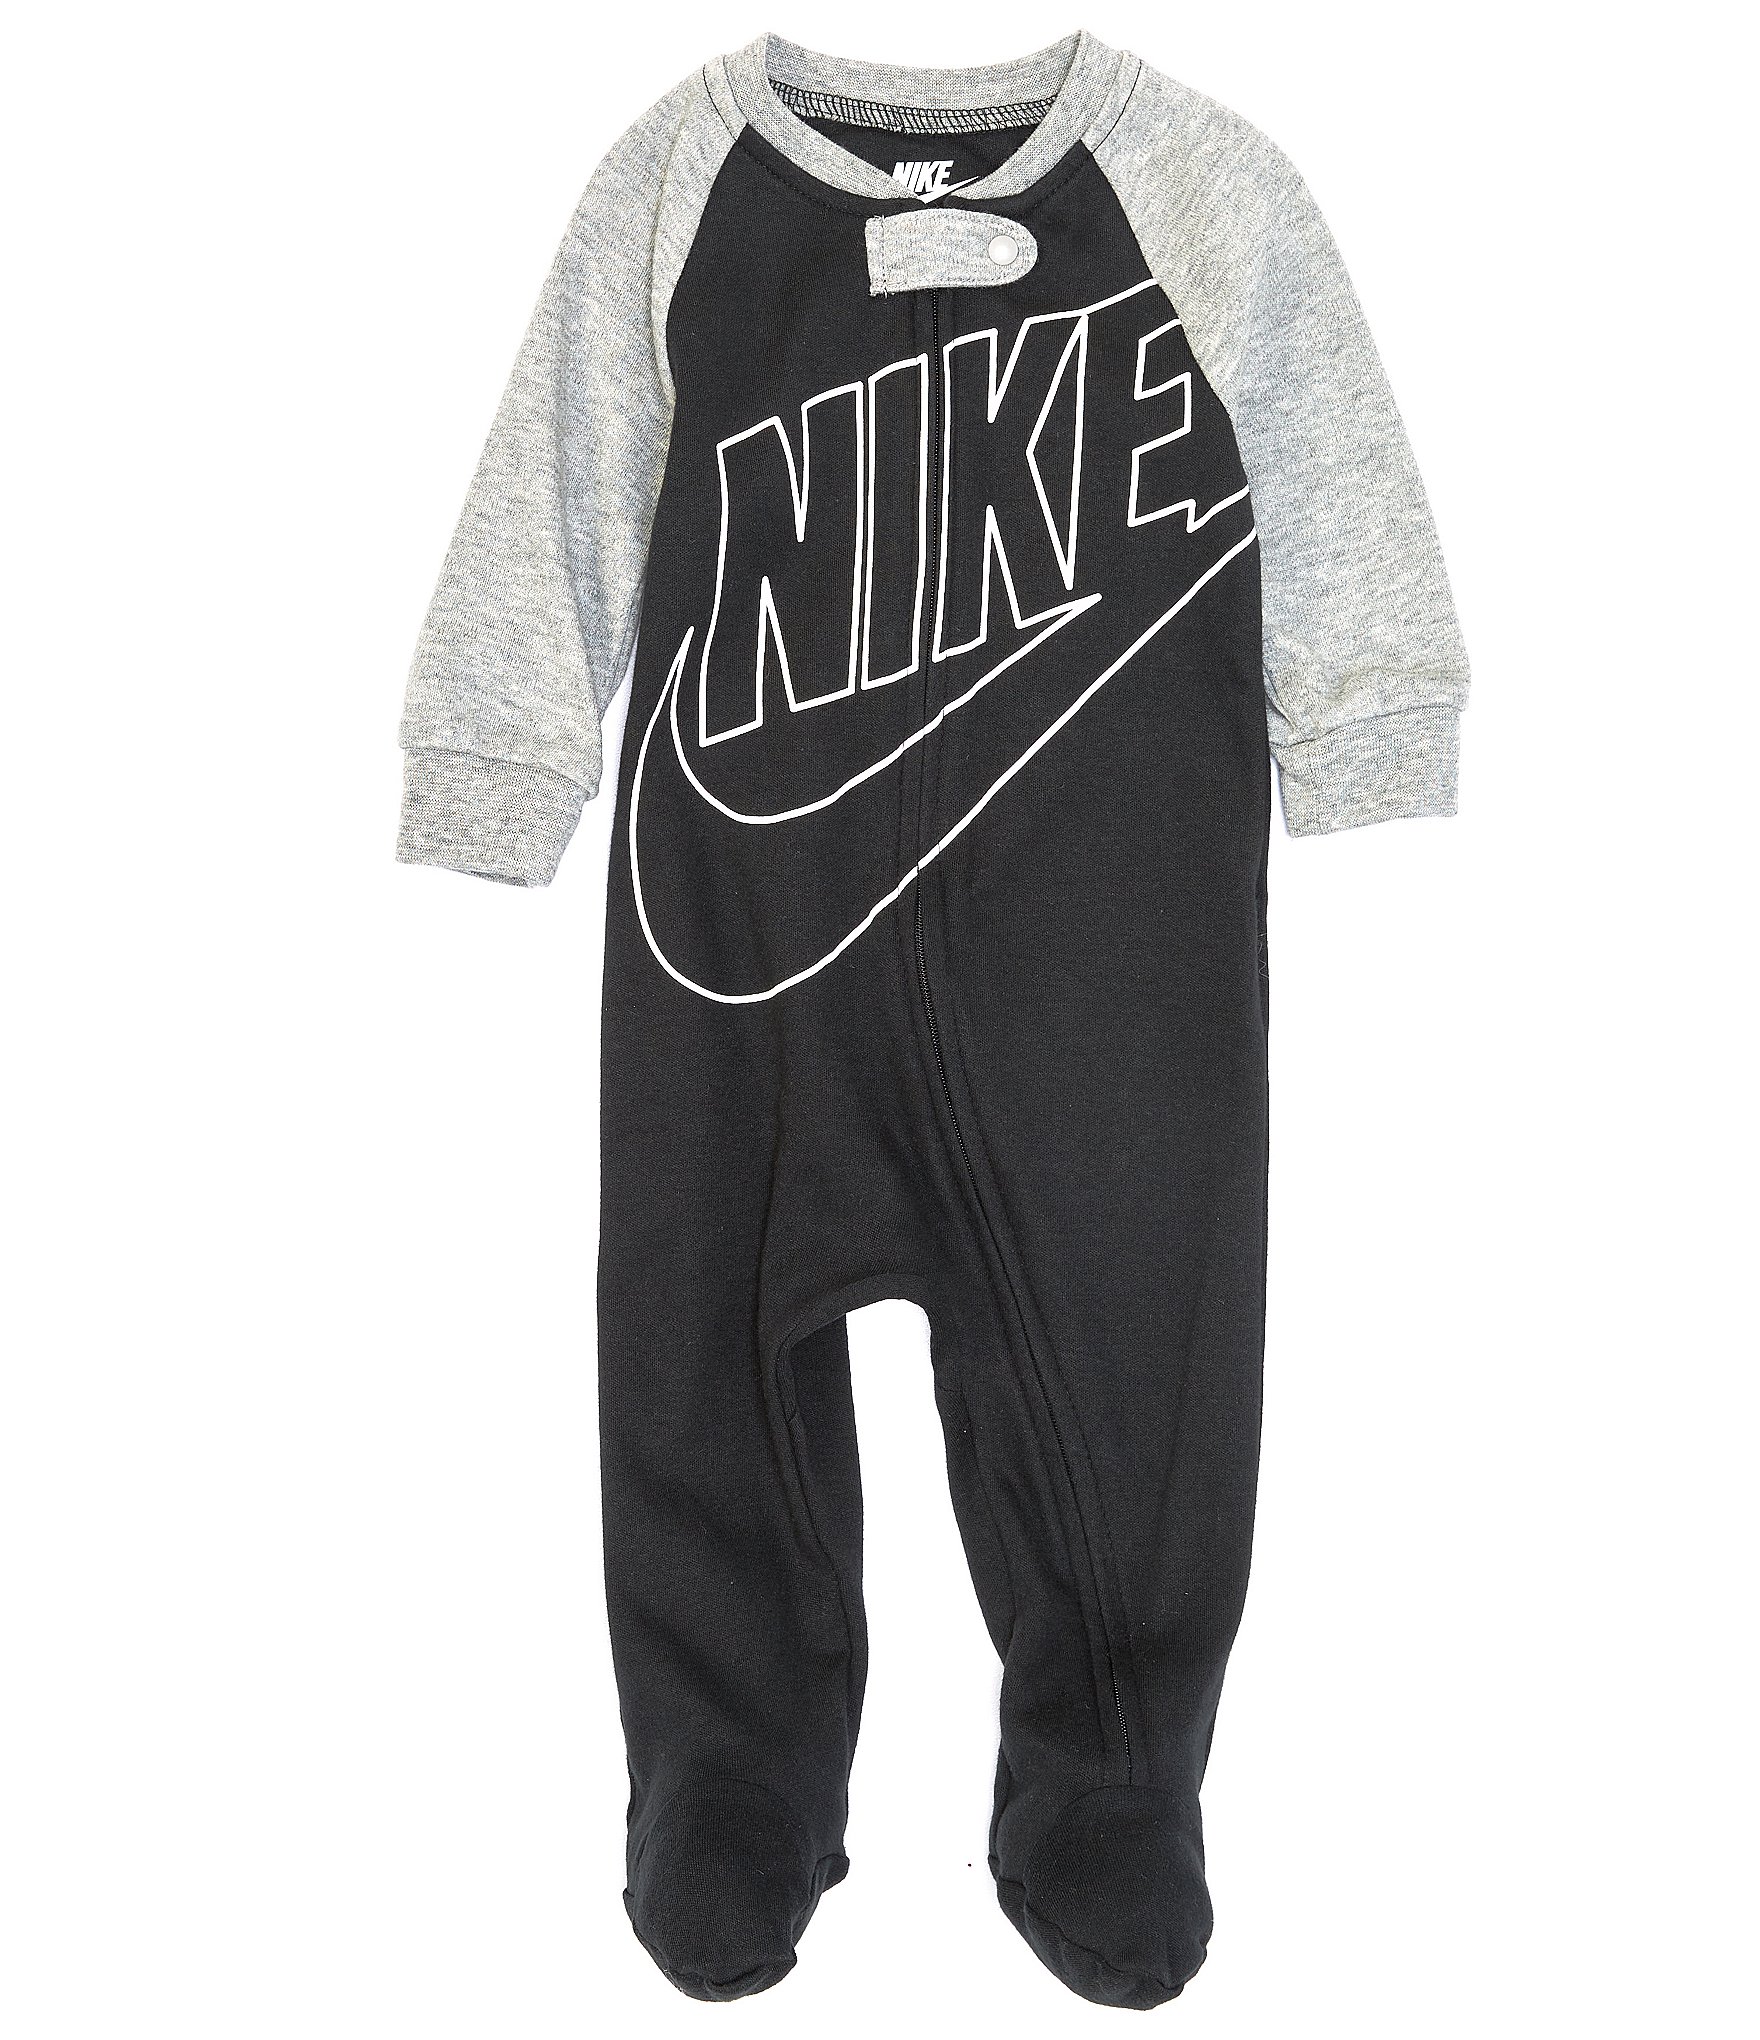 Nike Baby Boys Newborn-9 Months Long-Sleeve Futura Footed Coverall ...